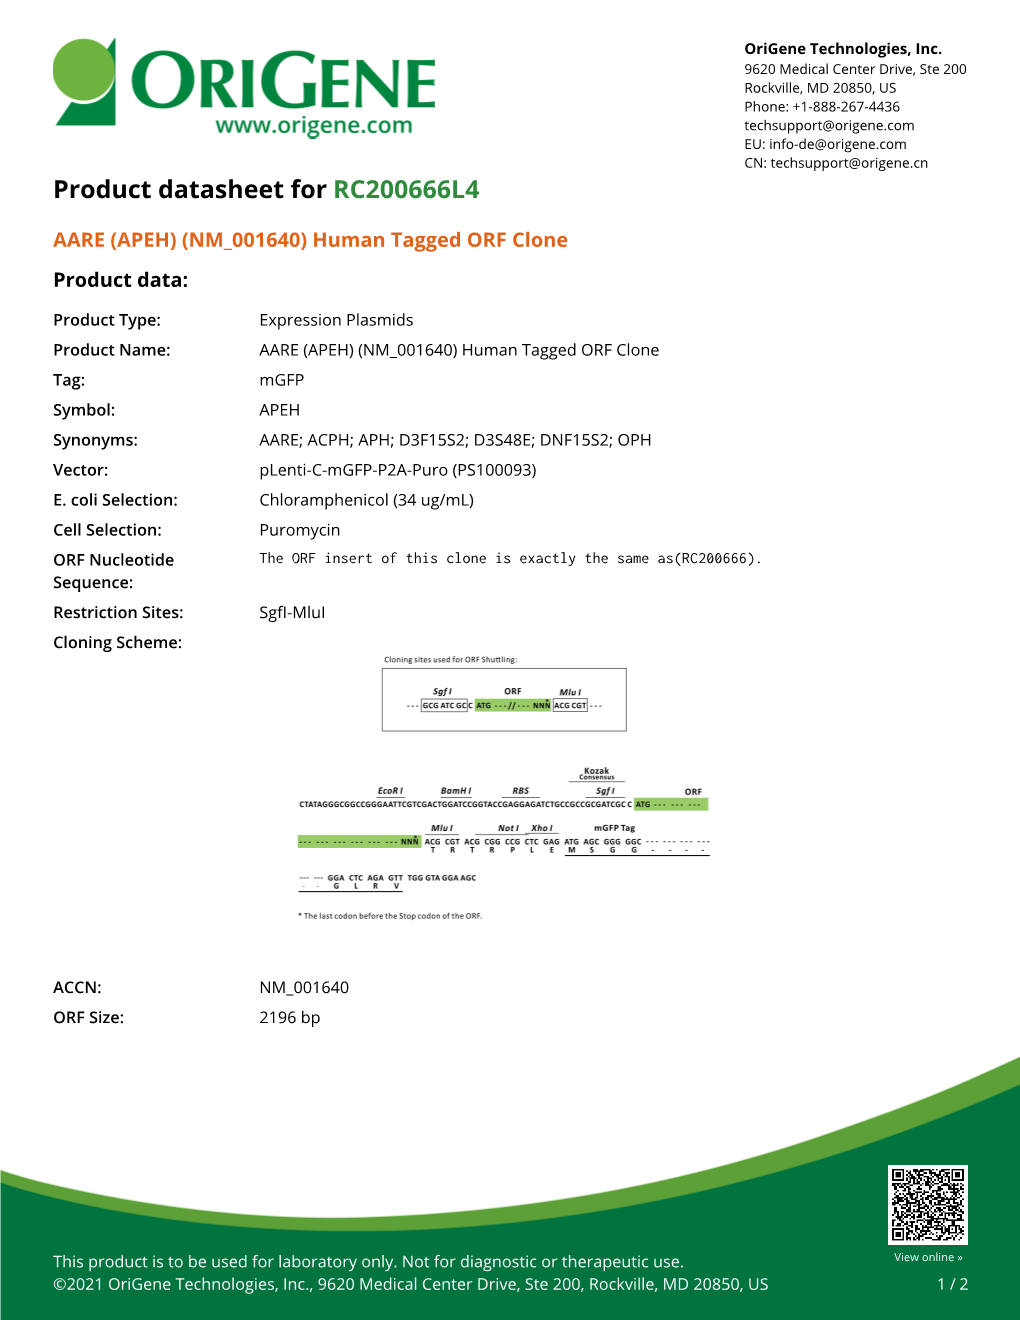 AARE (APEH) (NM 001640) Human Tagged ORF Clone Product Data